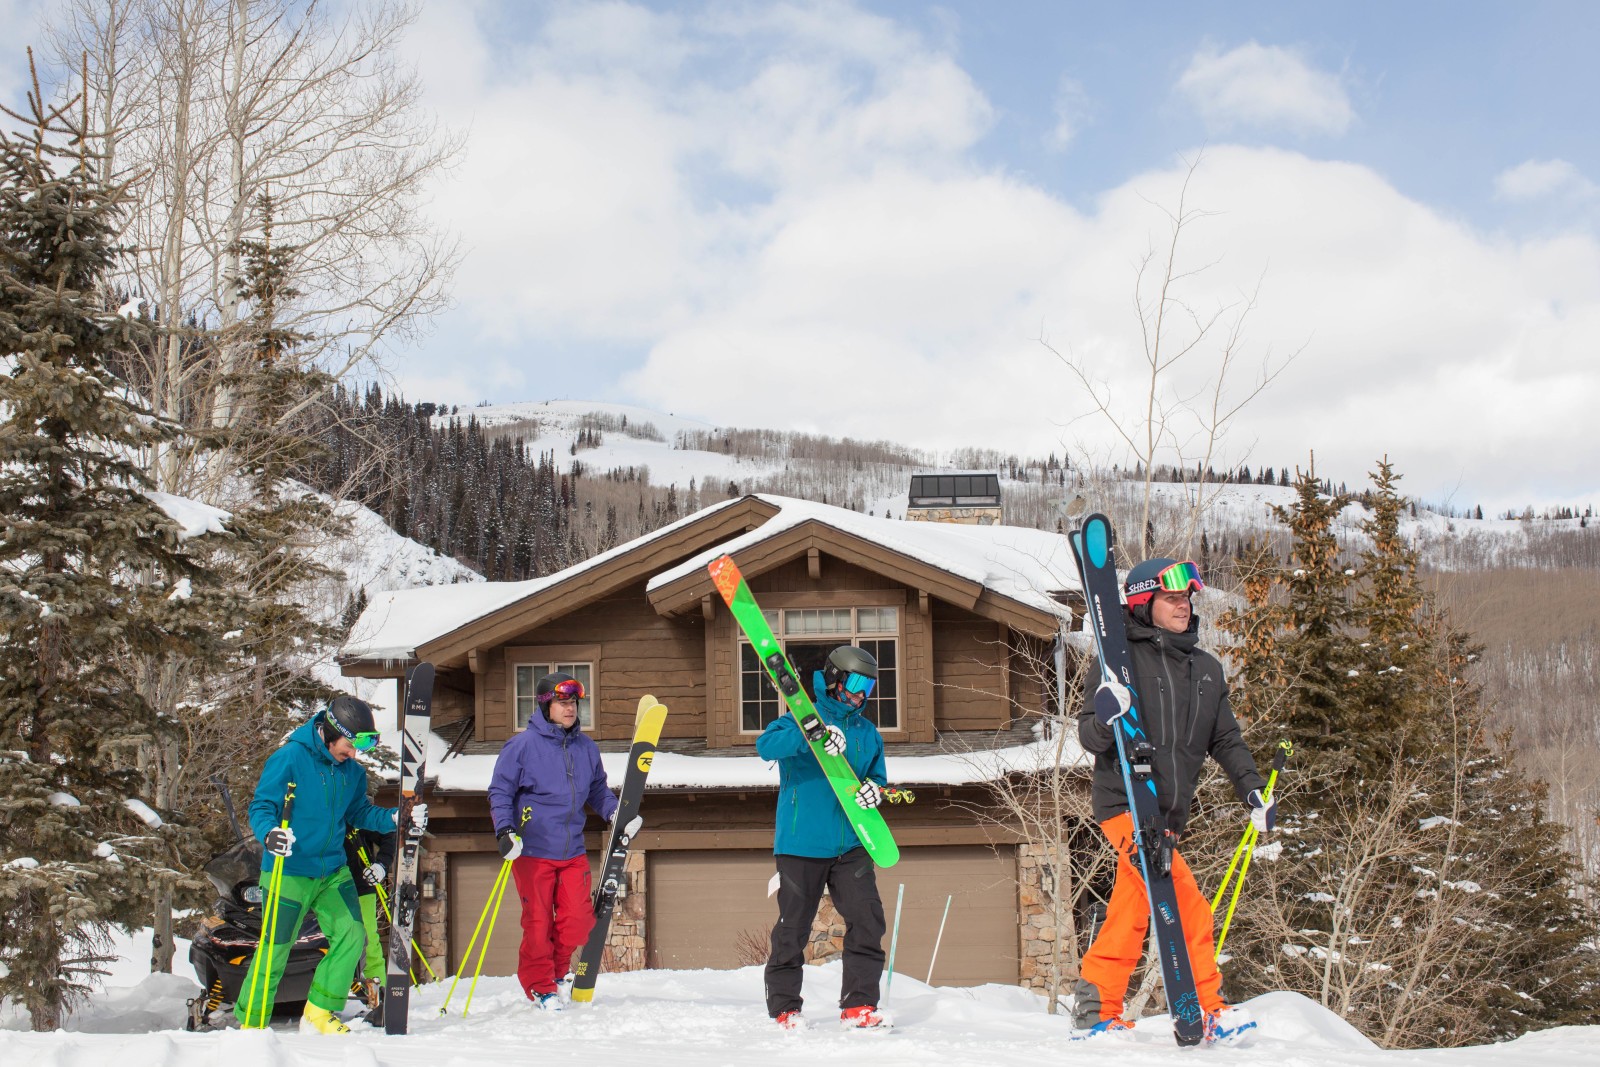 From Testing Skis to Catching Z’s - A Ski Tester’s Perfect Retreat